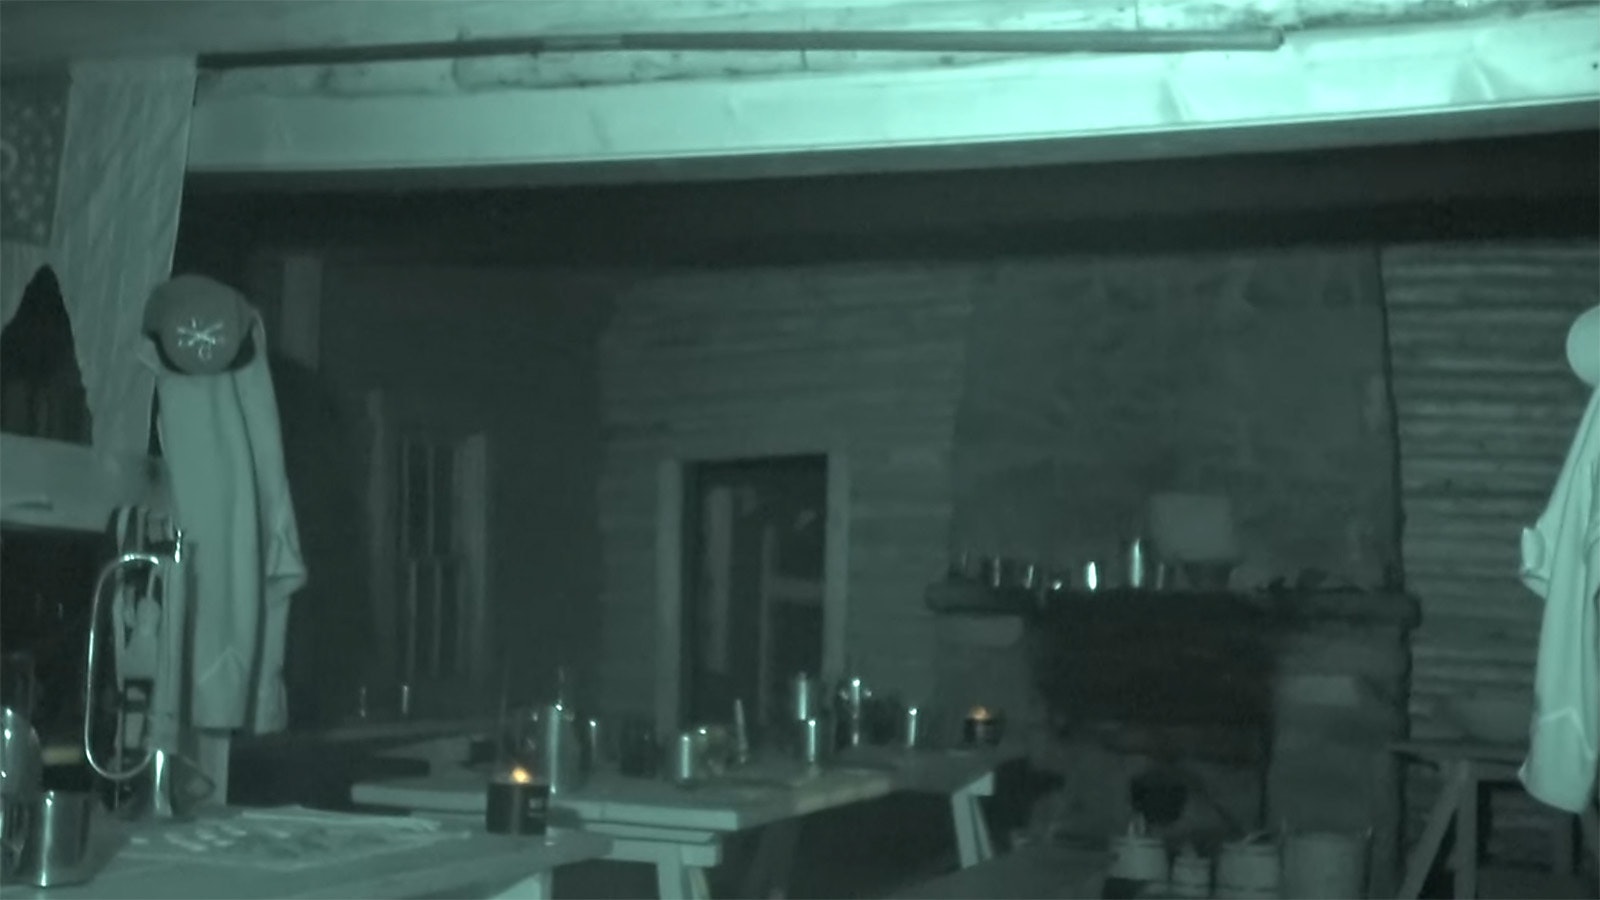 This screenshot from a 30-minute video shows infrared football from the Fort Caspar cavalry barracks. The paranormal detection devices on the tables are triggered multiple times.